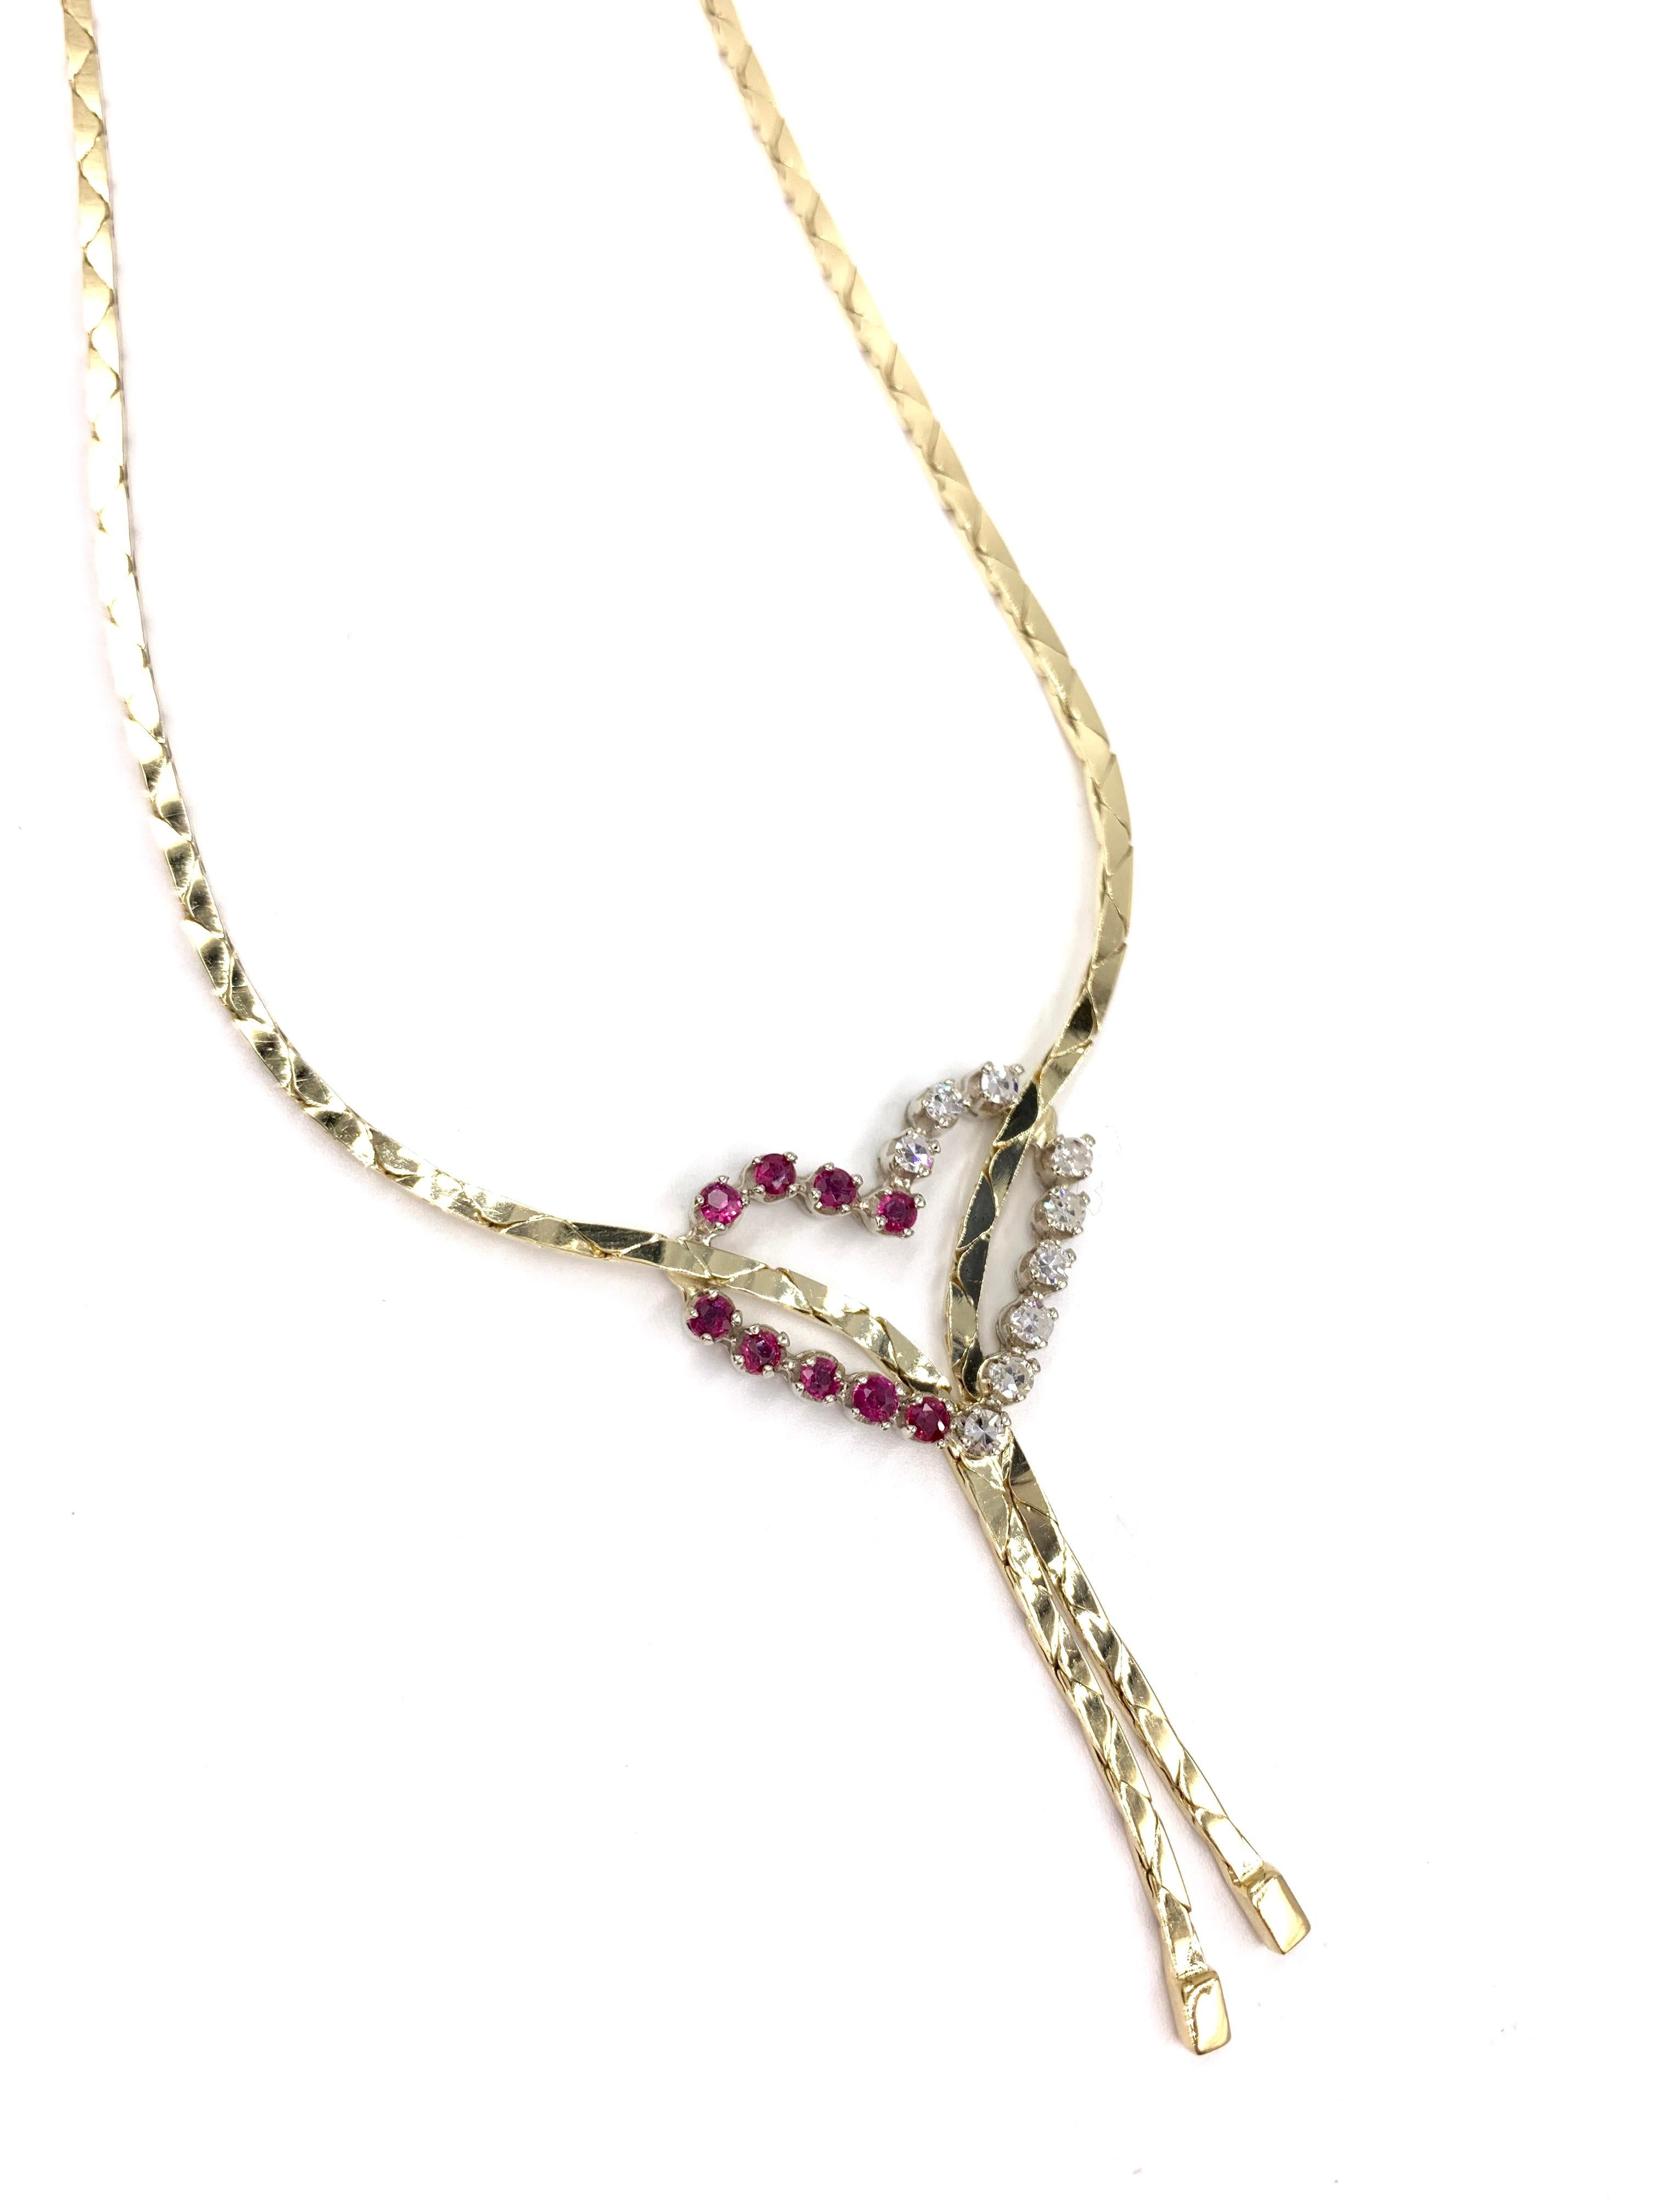 A wearable 14 karat yellow gold lariat style necklace made from a beautiful 1.5mm flat high-polished chain, joining at the center with an open heart pendant featuring 9 round single cut white diamonds and 9 round well saturated rubies. Diamond total